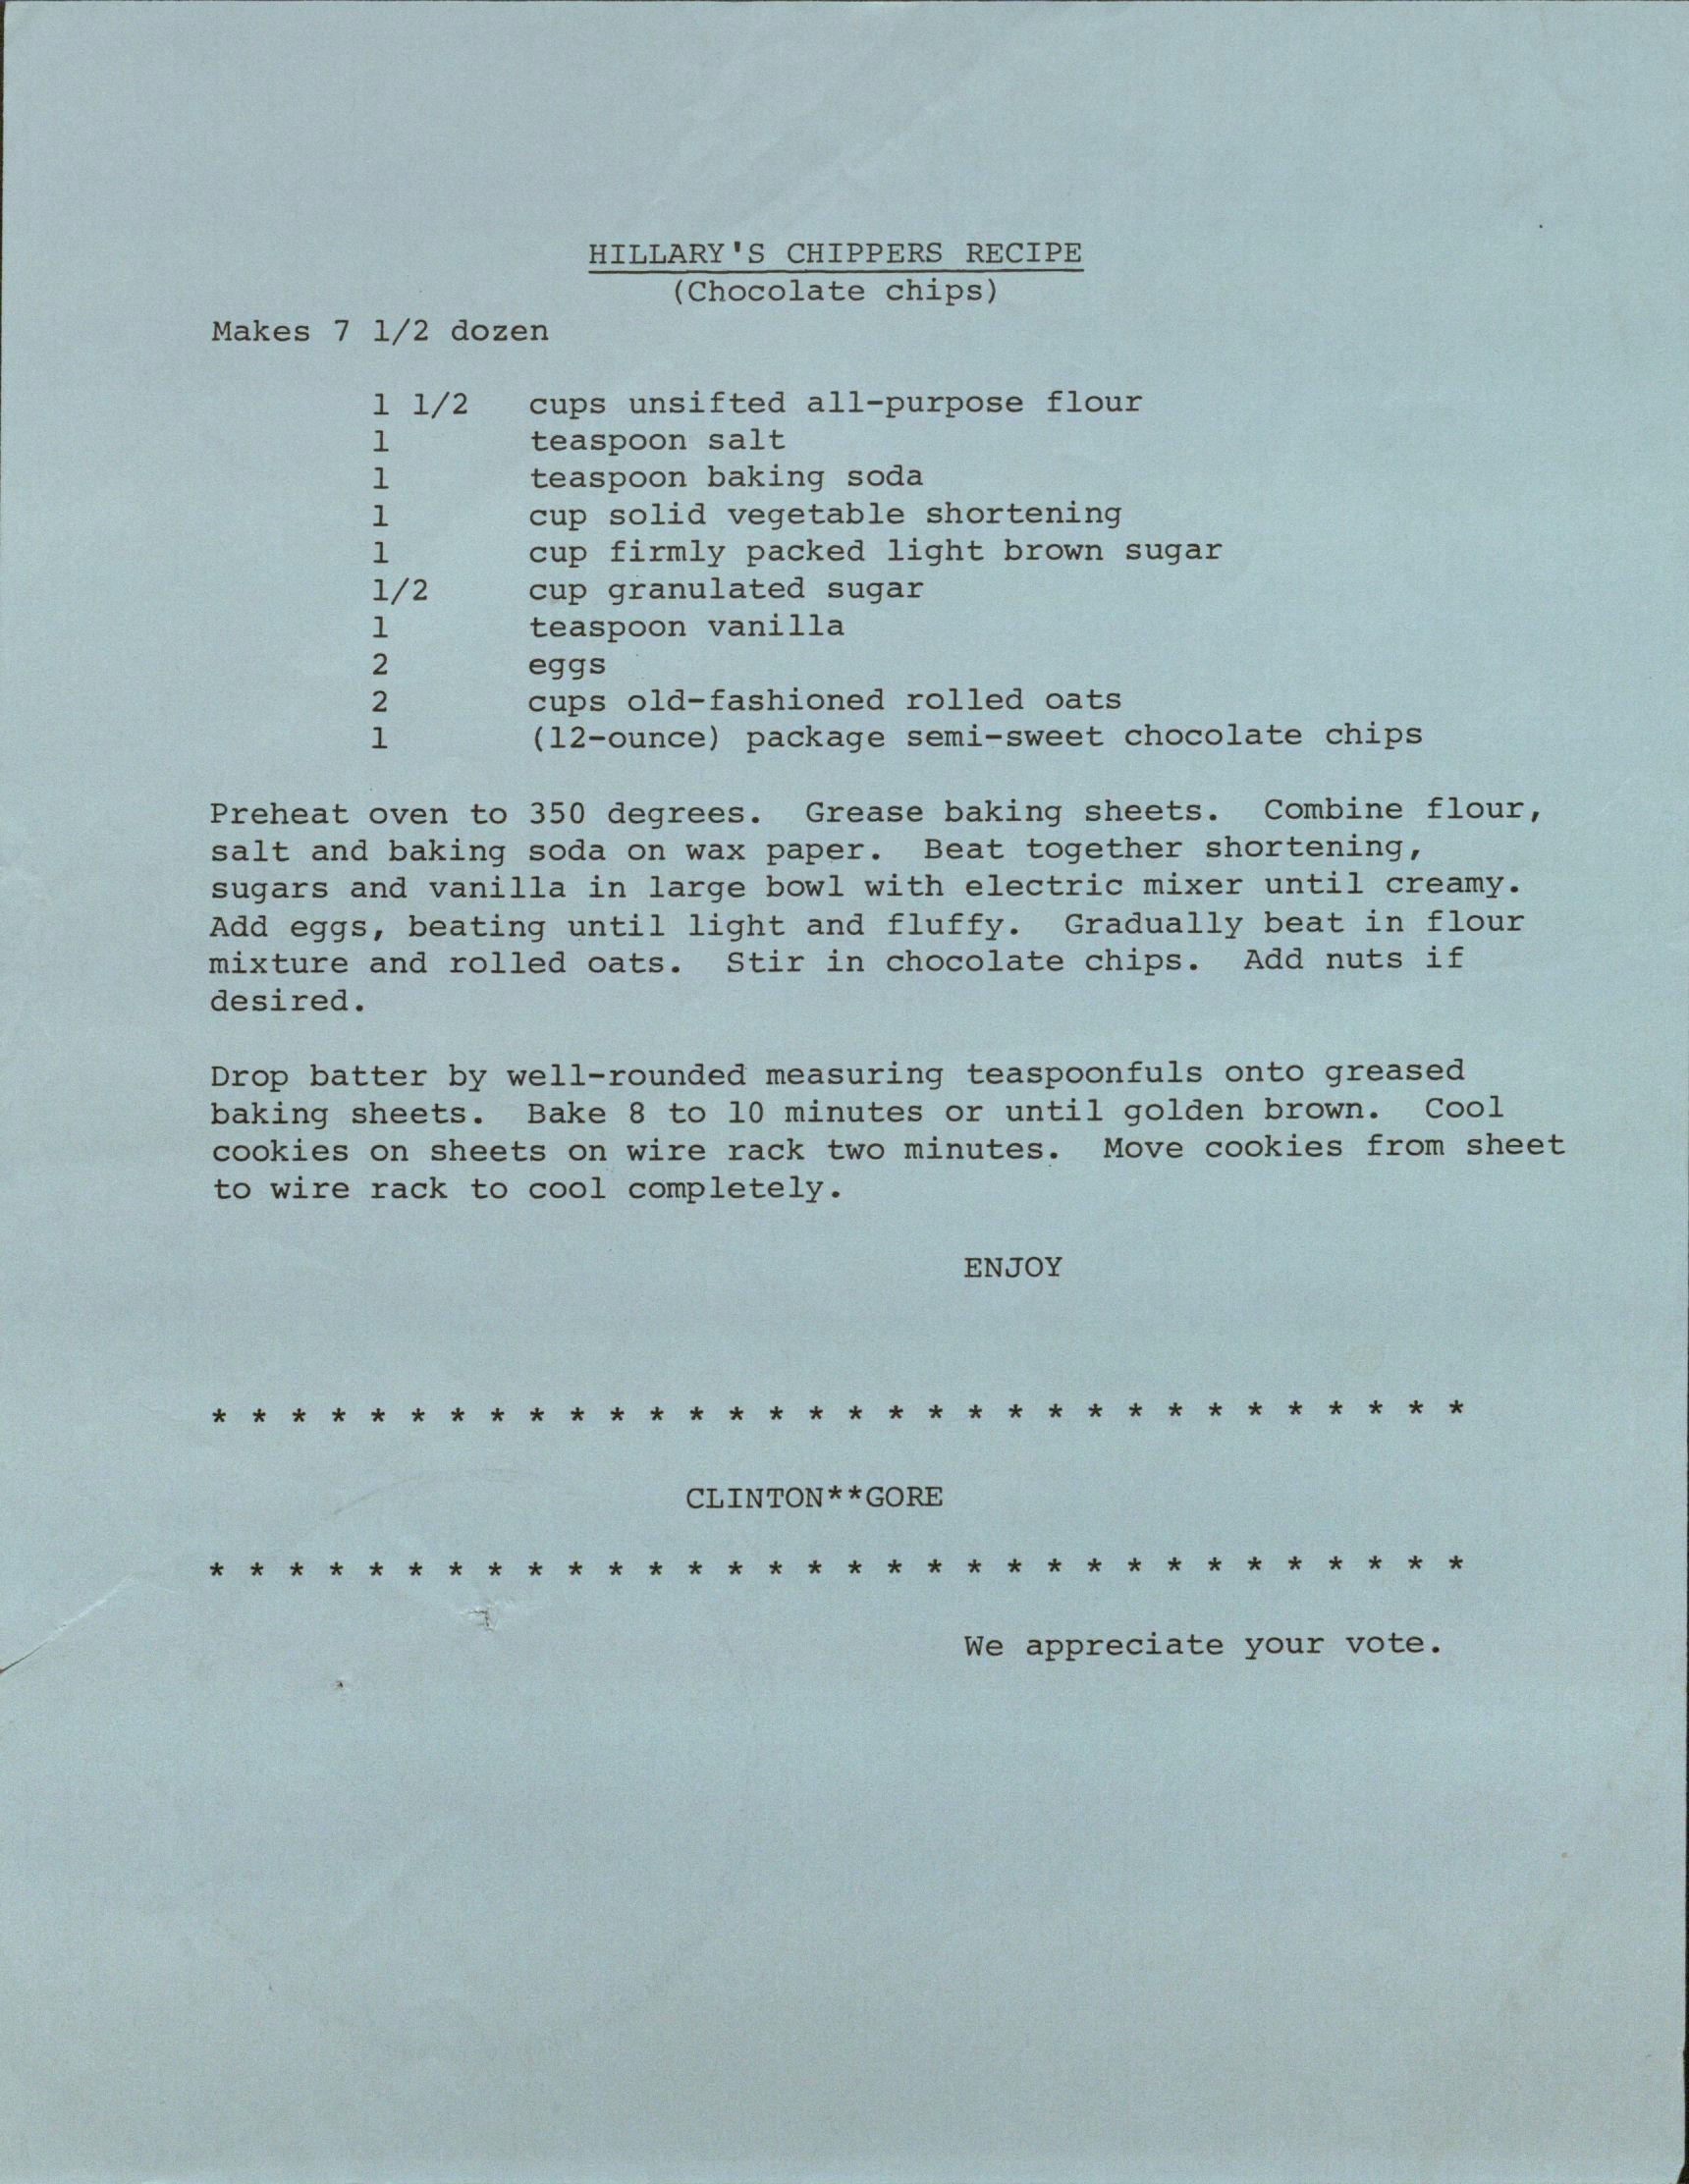 Hillary Clinton's Chippers Recipe and note of appreciation for Bruce McKinney's vote for Clinton and Gore